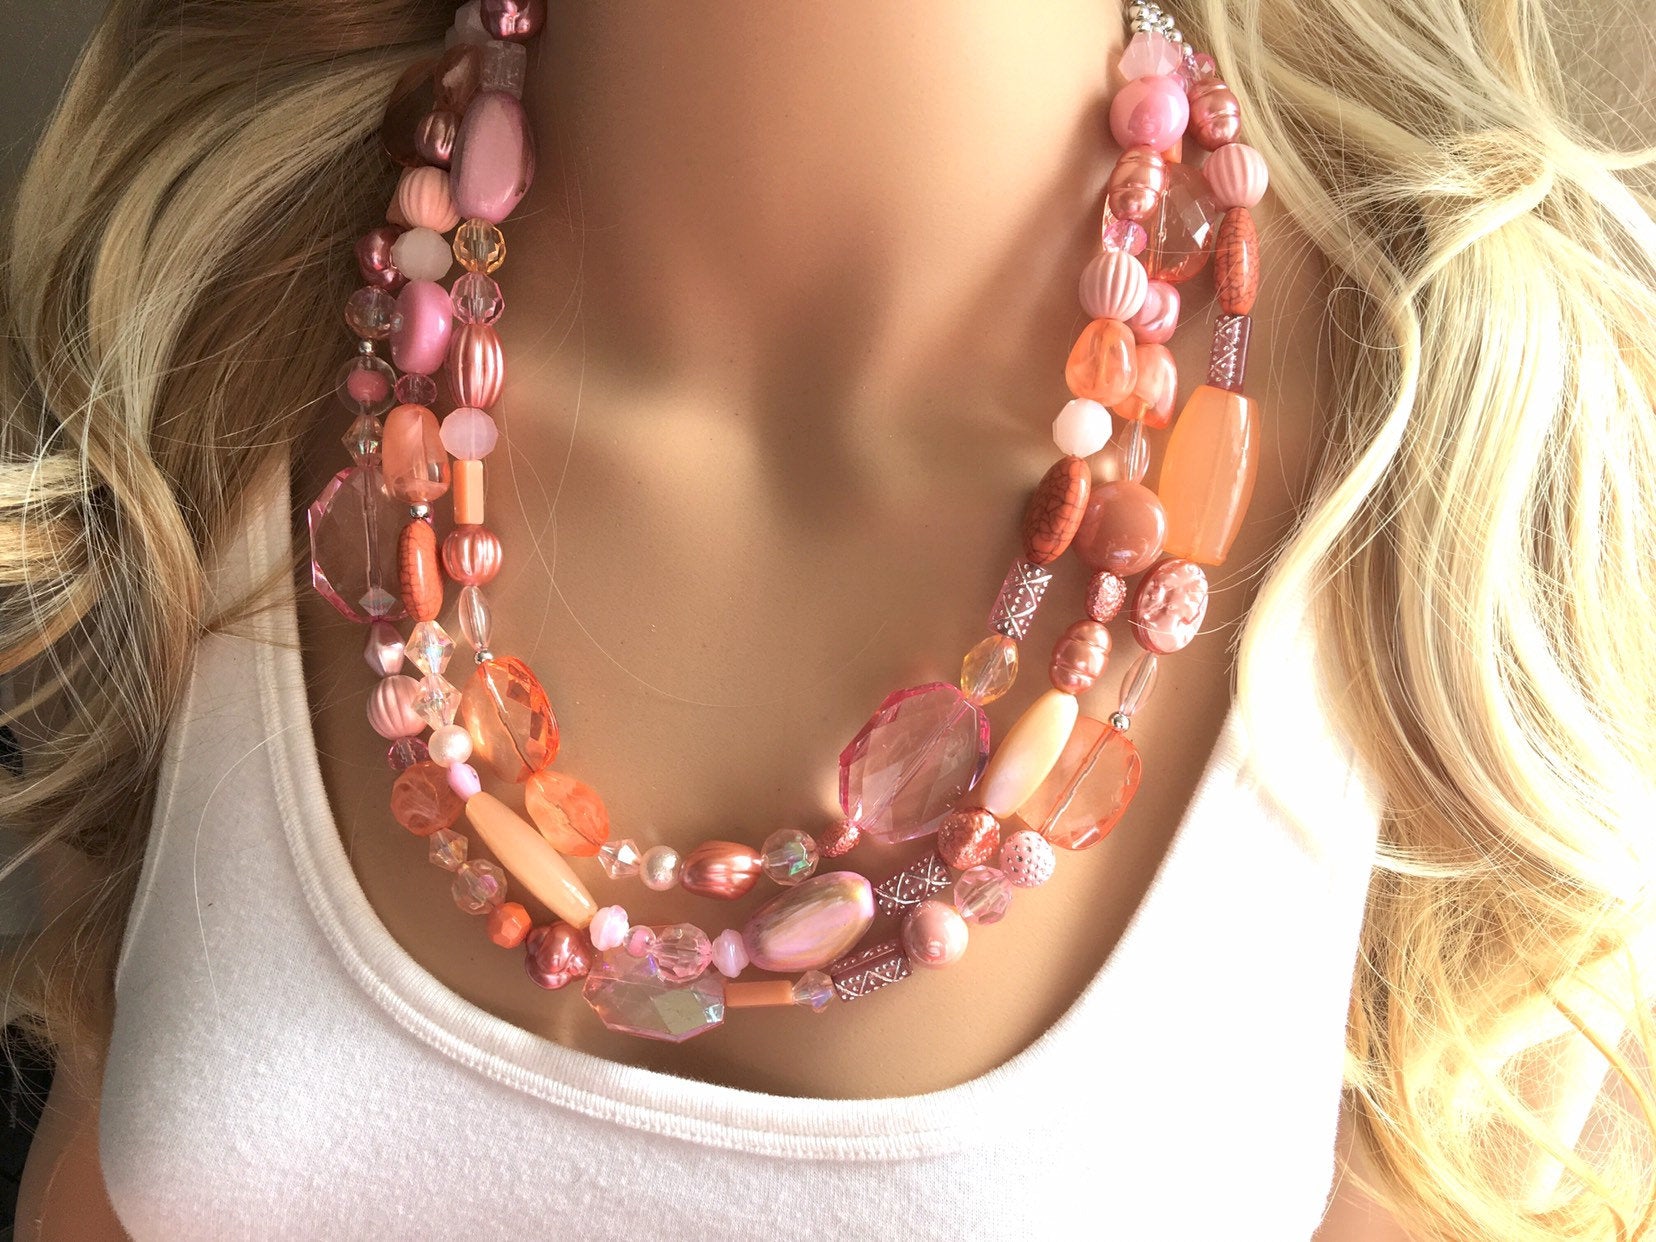 Pink and White Multi Layer Bib Necklace with Adjustable Golden Chain -  Galapagos Tagua Jewelry